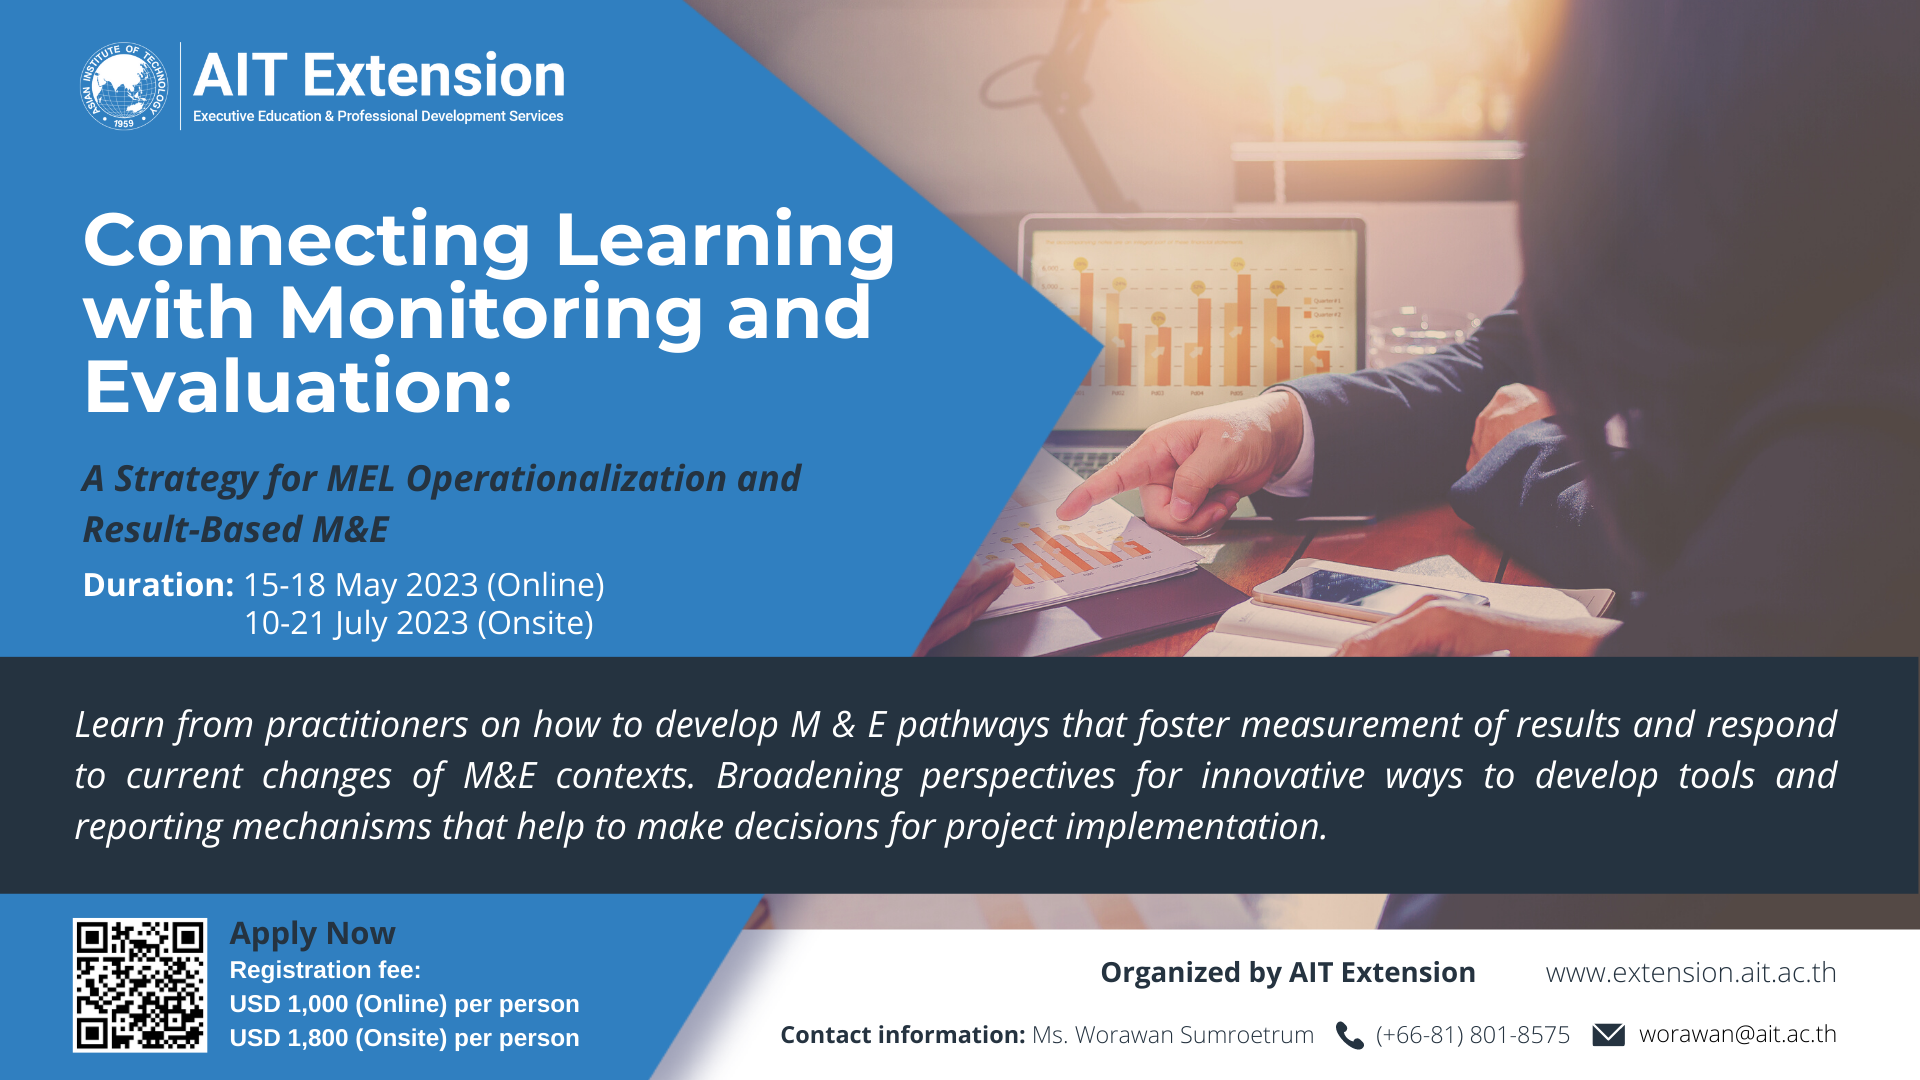 Connecting Learning With Monitoring And Evaluation: A Strategy For MEL Operationalization And Result-Based M&E